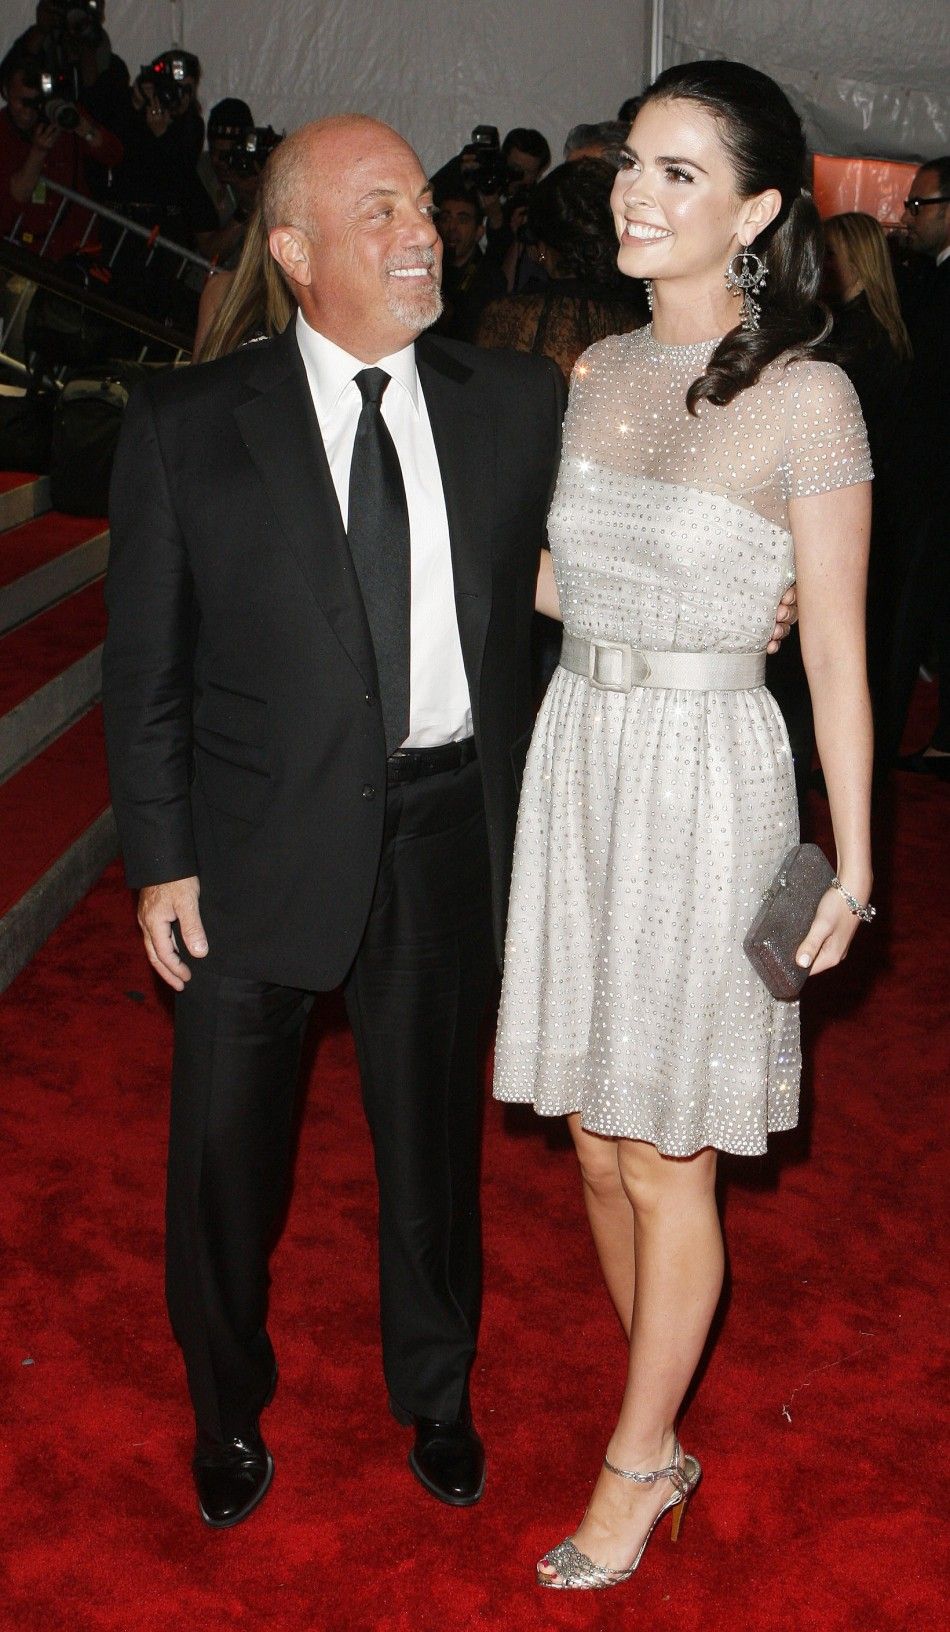 Singer Billy Joel and wife Katie Lee Joel arrive for the Metropolitan Museum of Art Costume Institute Gala, quotThe Model As Muse Embodying Fashionquot in New York, May 4, 2009.